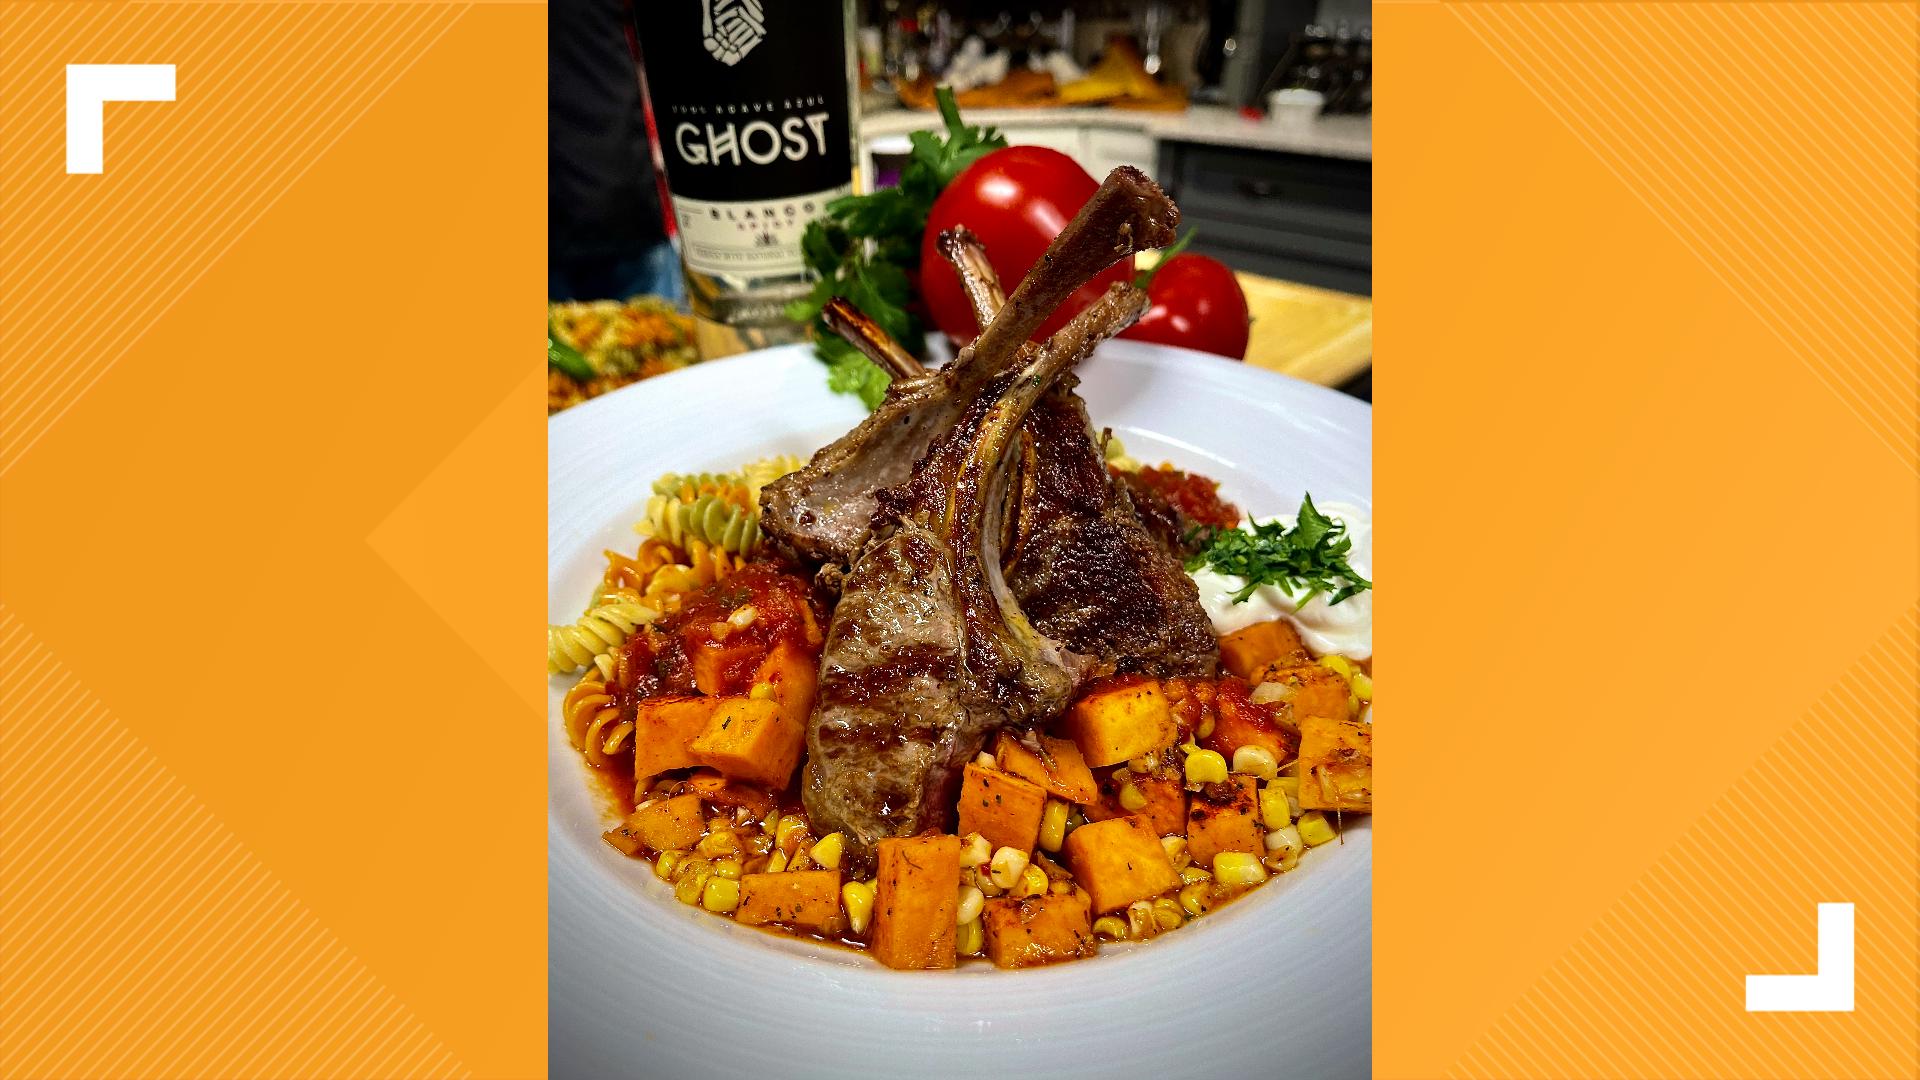 Mexican Style Fire-Grilled Lamb Chops are served over pasta along with roasted corn and sweet potatoes, all tossed in a Sweet and Smoky Chipotle Passata.